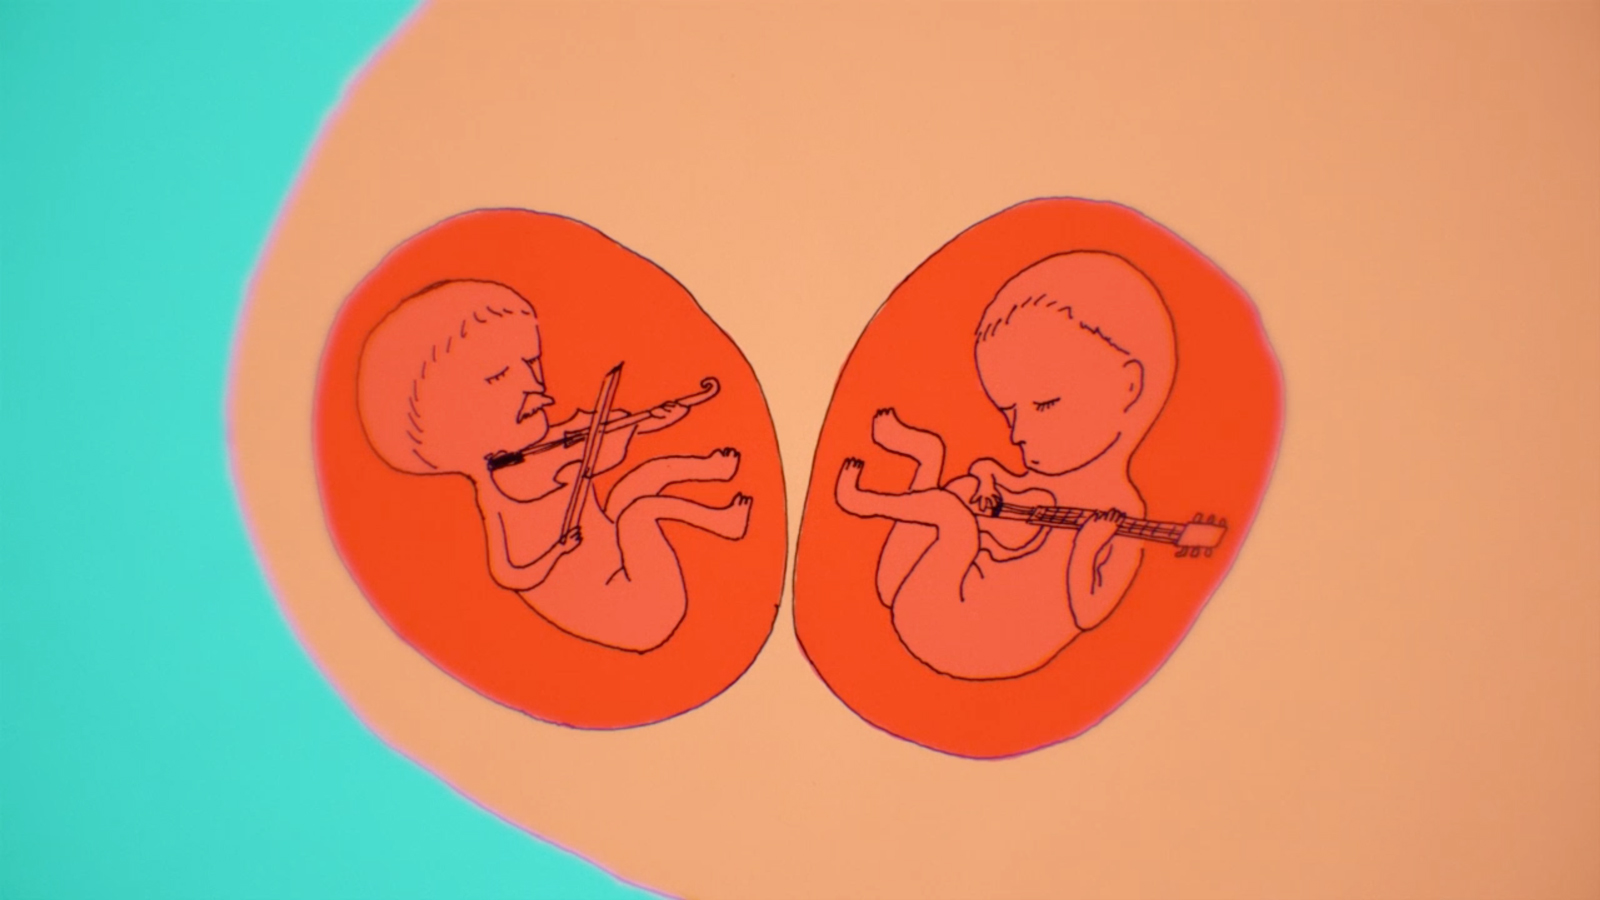 Interview, behind-the-scenes film animating lives of folk musicians that later became the award-winning music documentary series Drawn & Recorded. Vimeo Staff Pick